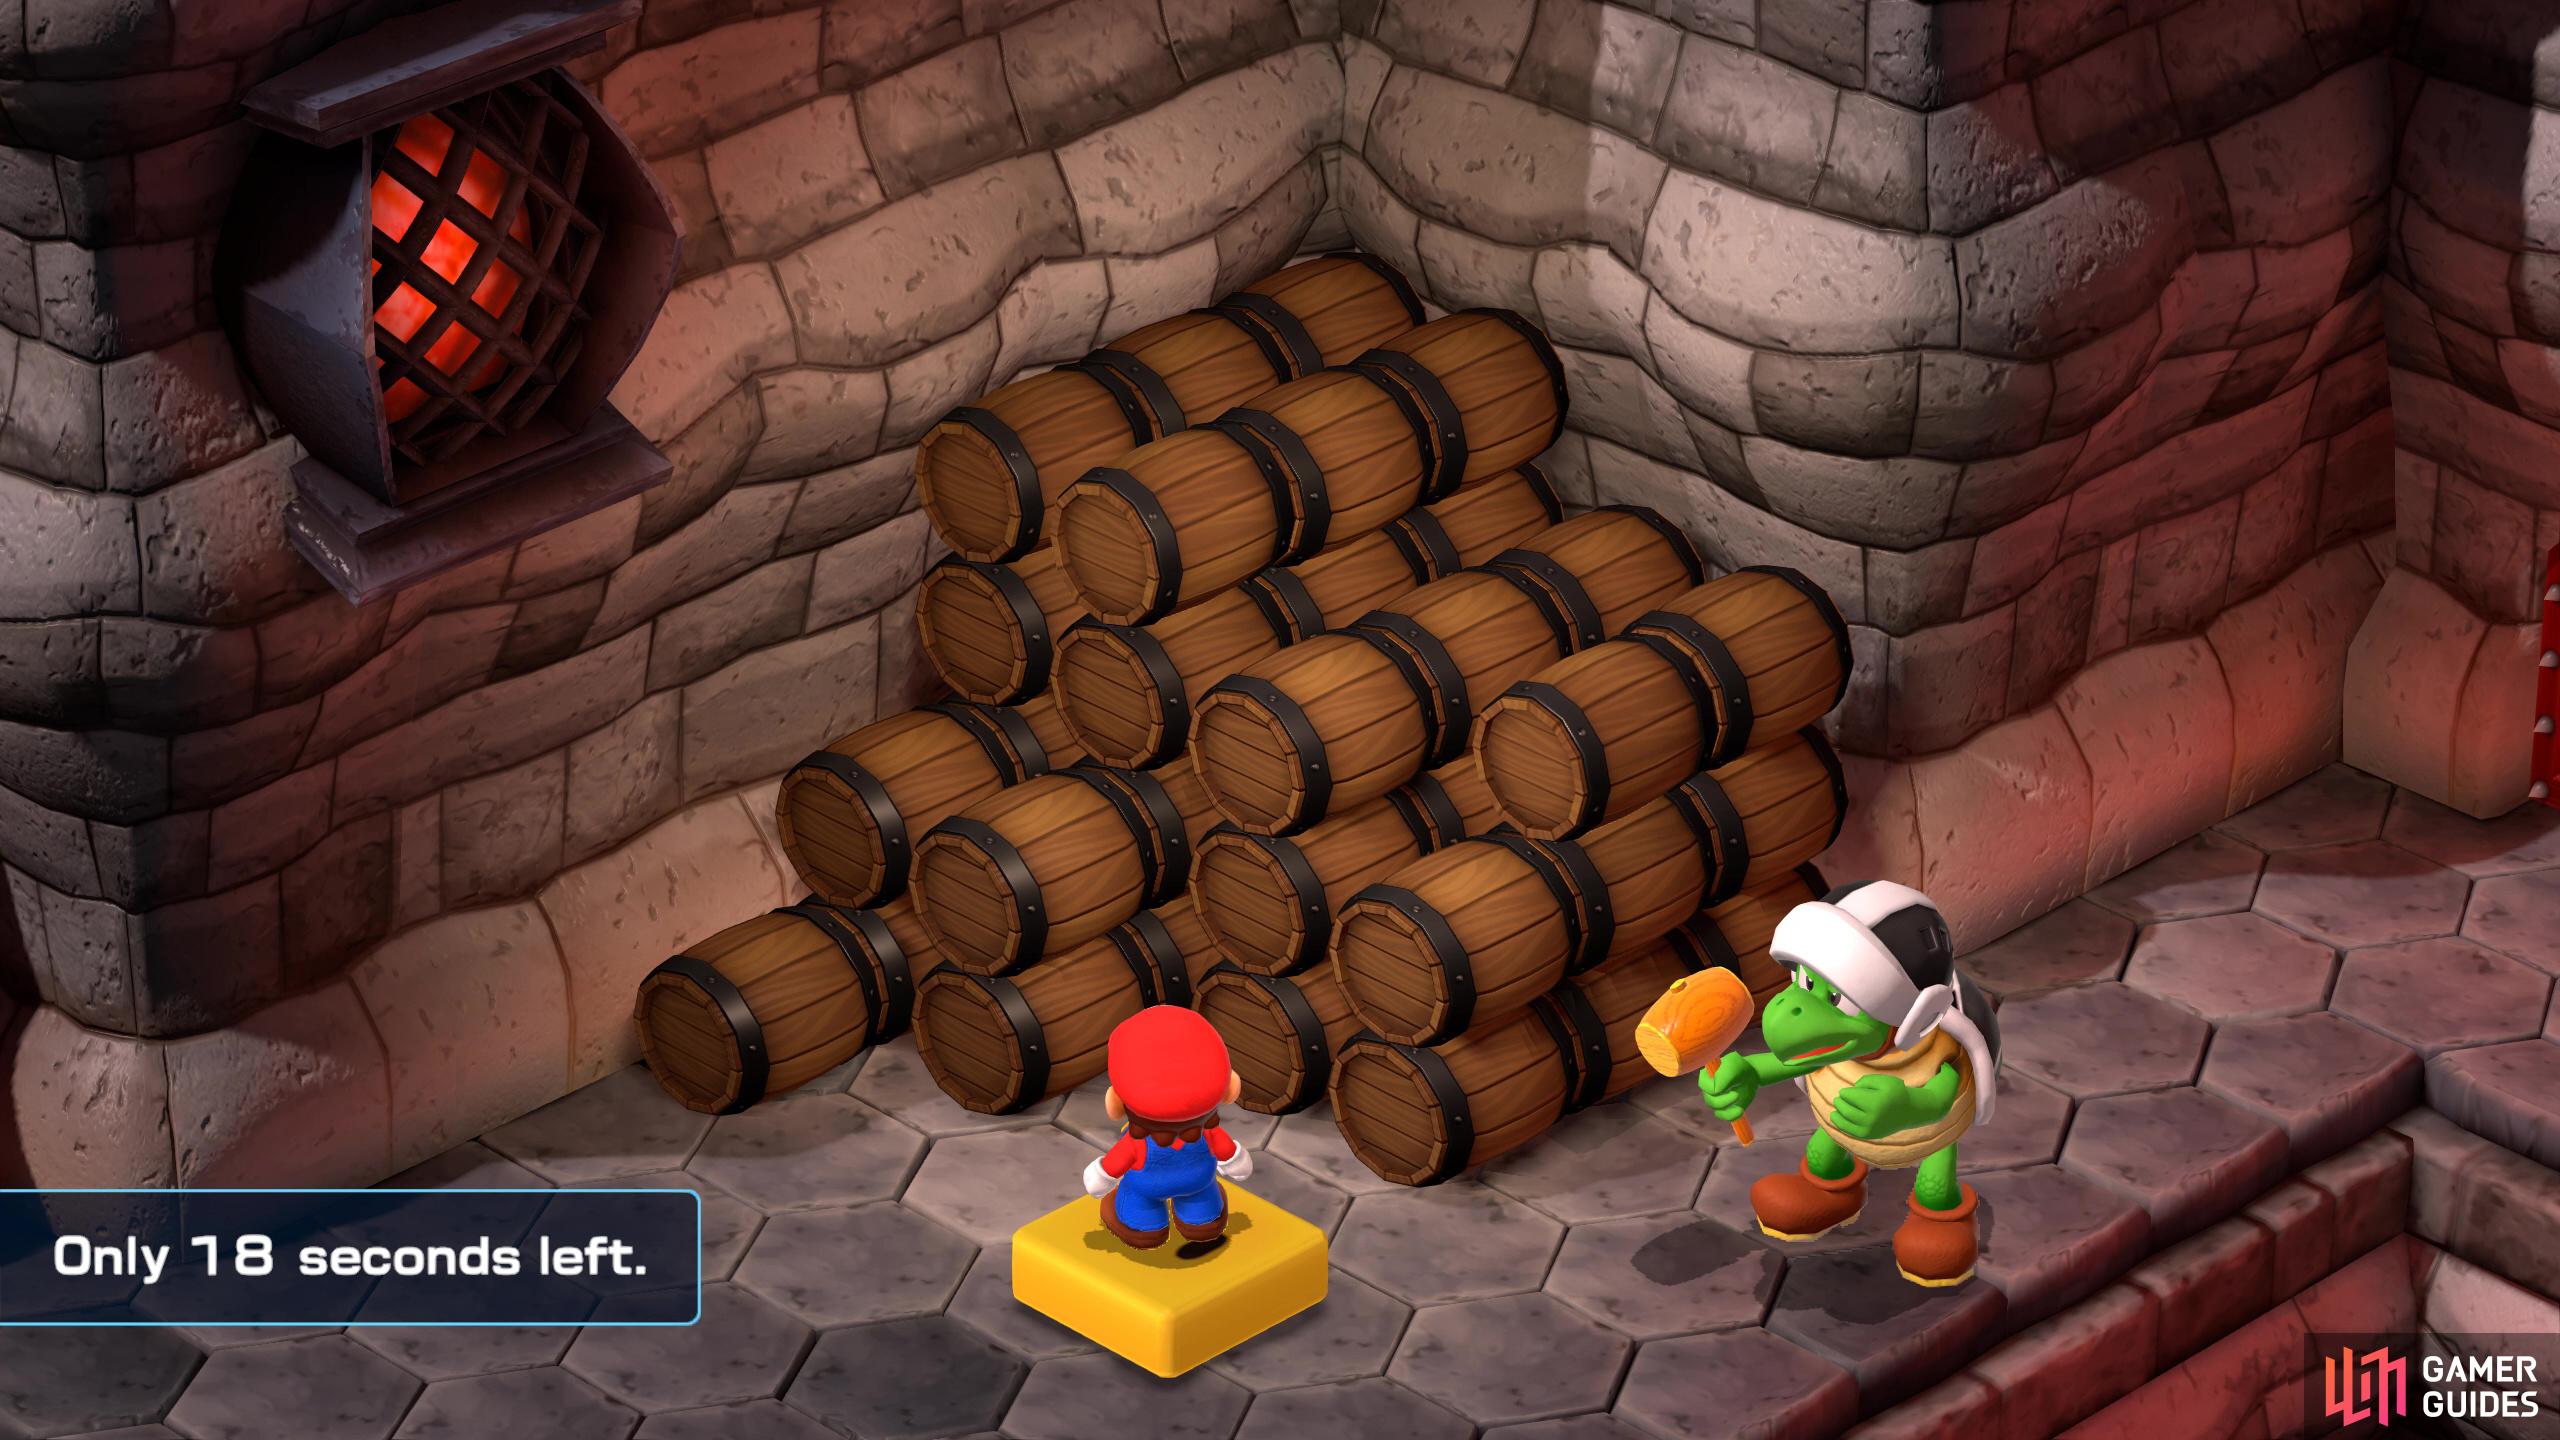 Puzzle Course 2 Room - 2: The second puzzle room asks you to count the barrels within the time limit.